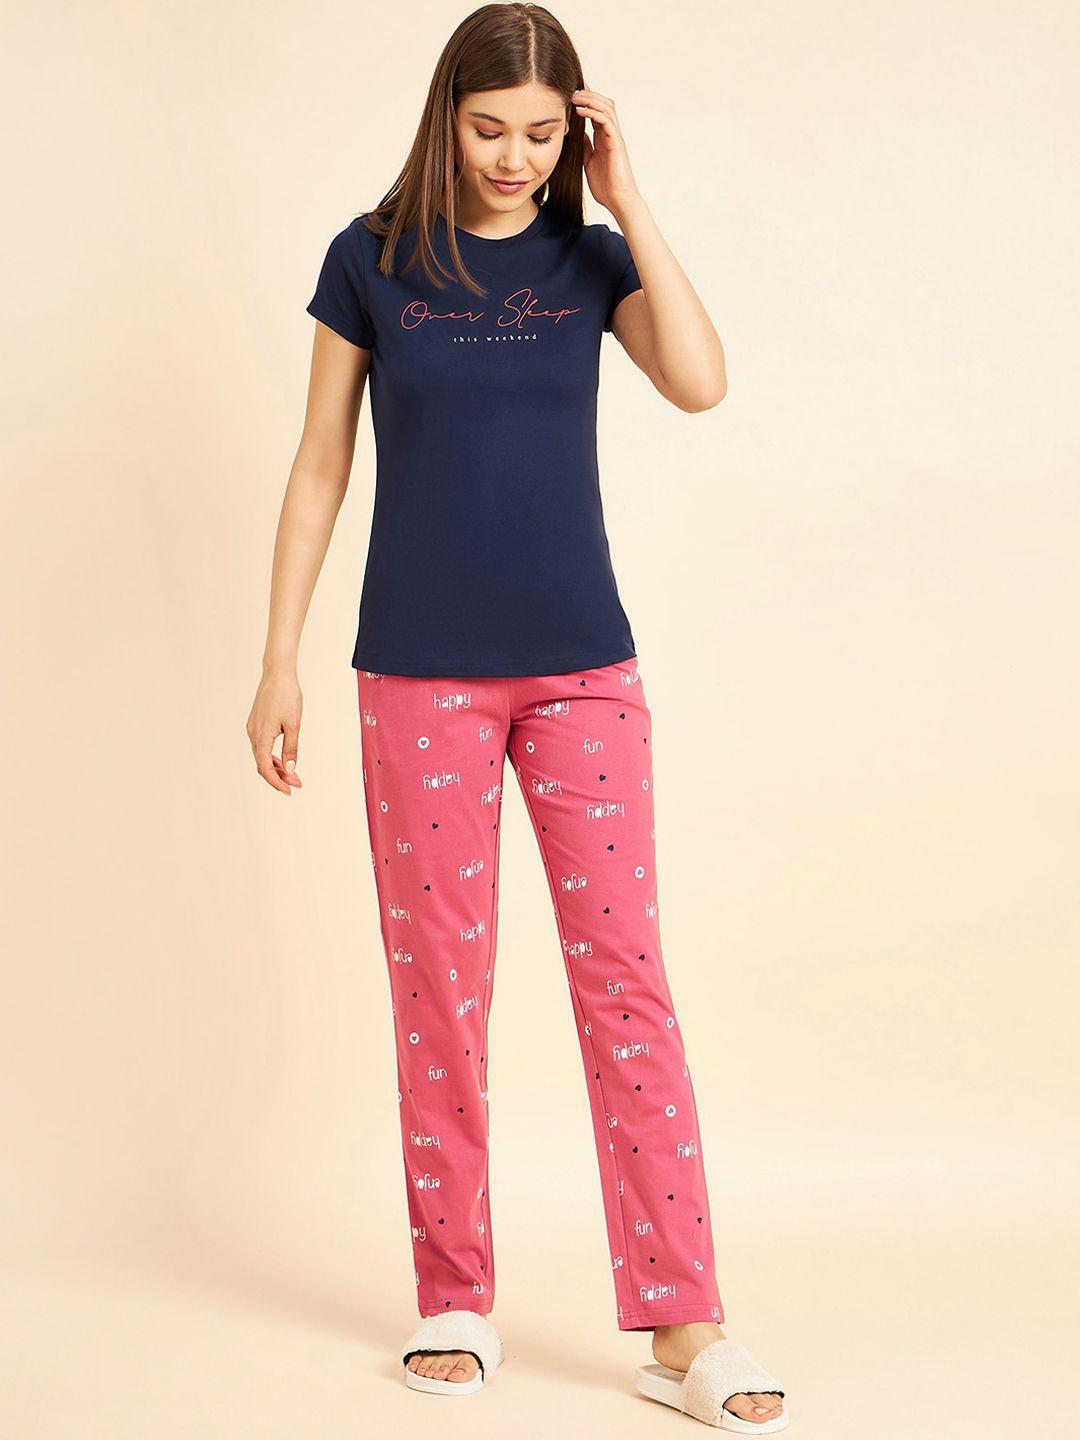 sweet dreams navy blue & pink typography printed pure cotton night suit